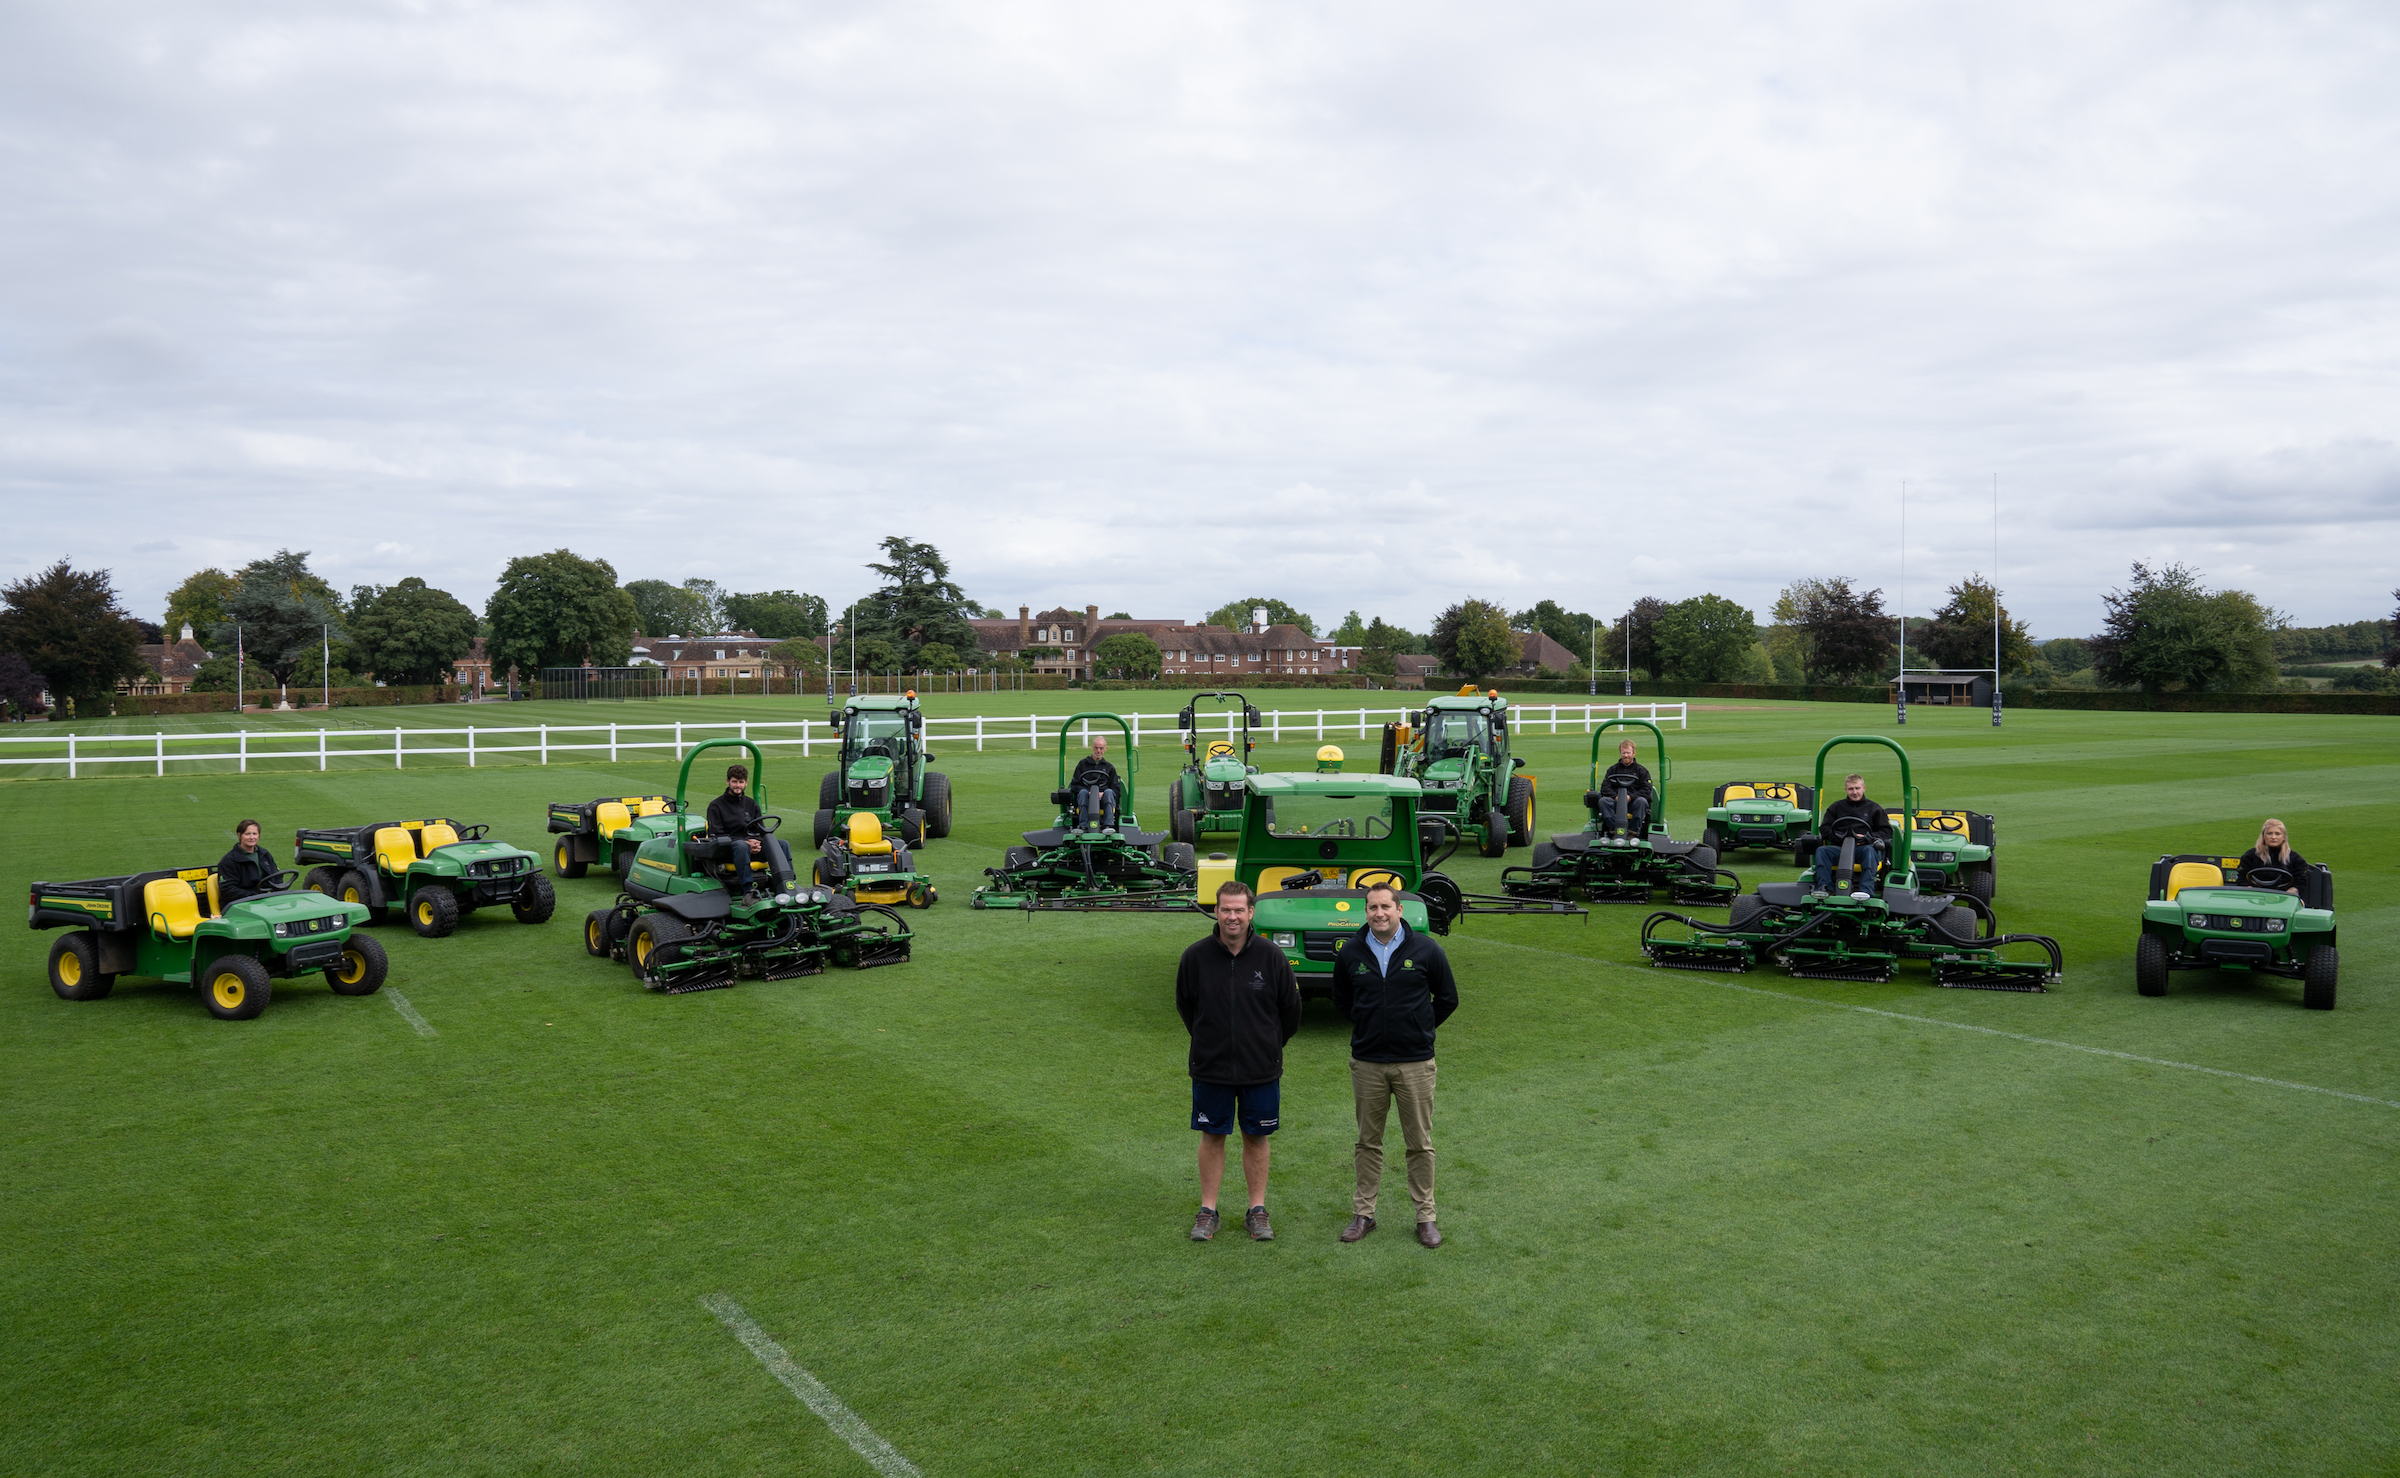 Forward-thinking school invests in future with new machinery fleet